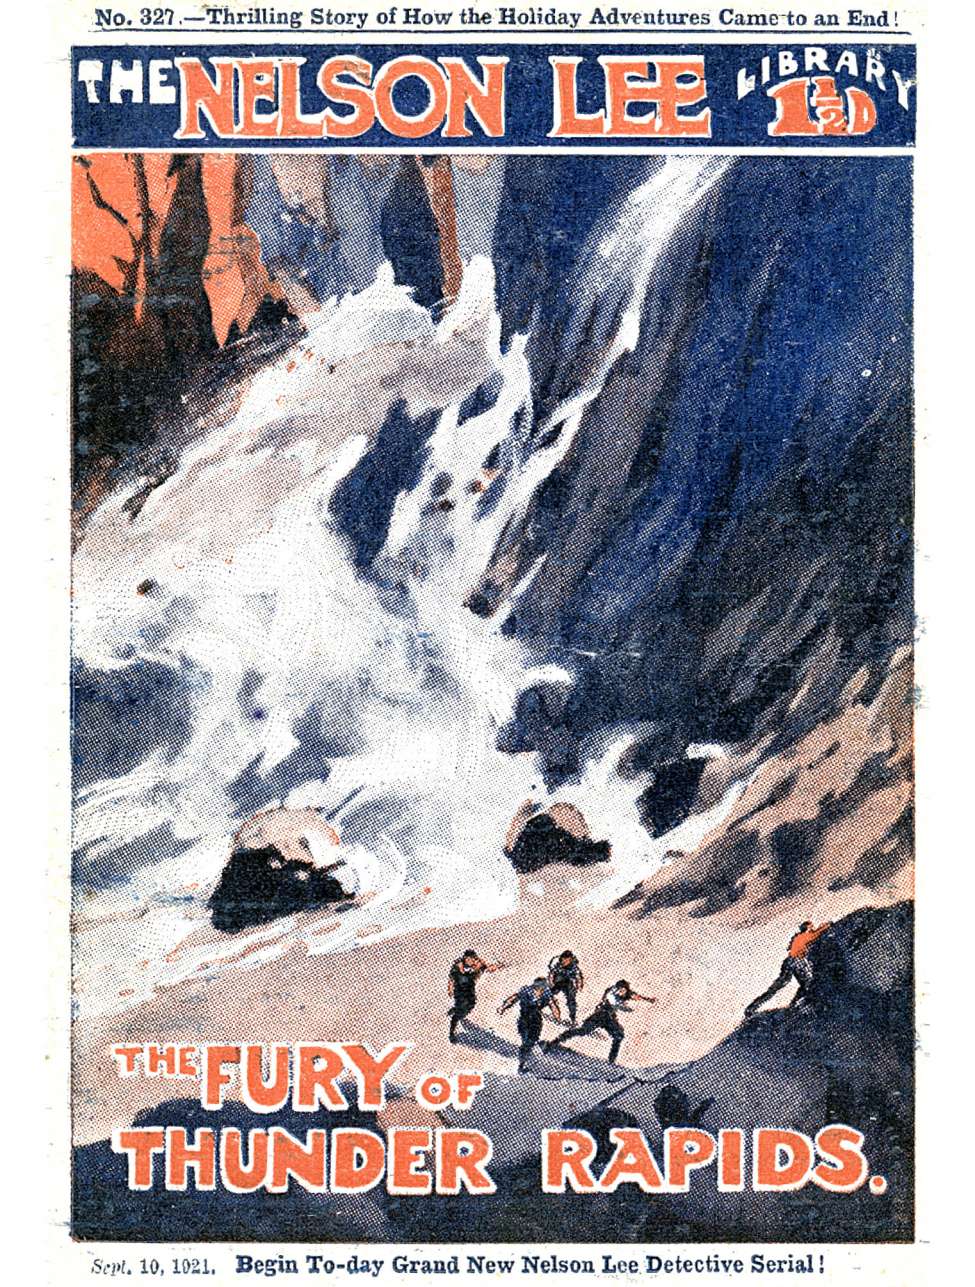 Comic Book Cover For Nelson Lee Library s1 327 - The Fury of Thunder Rapids